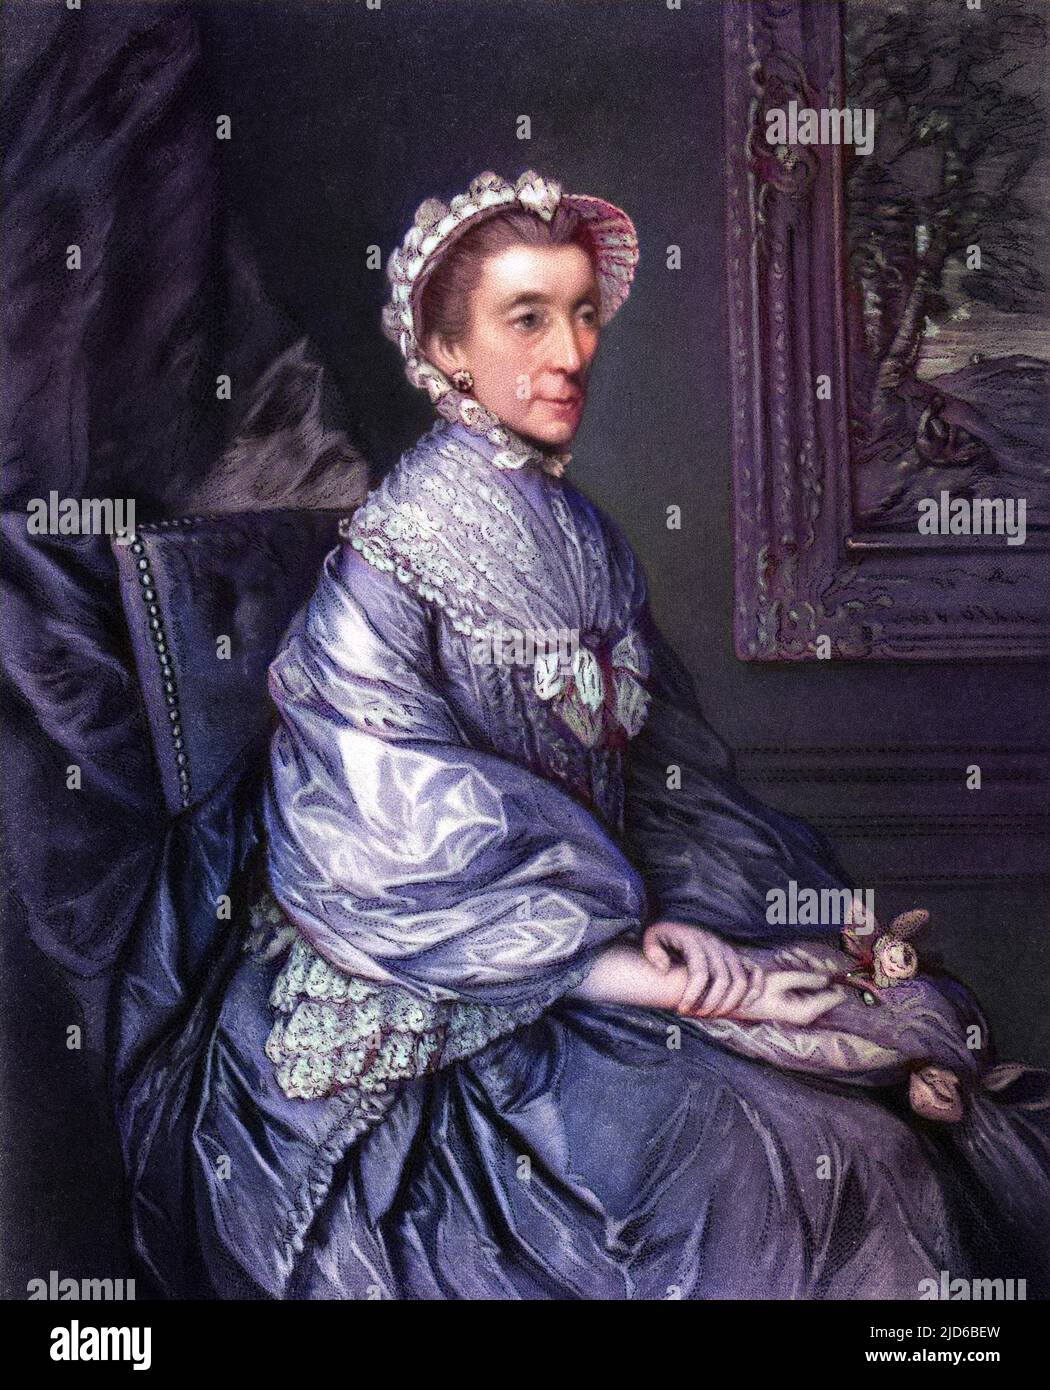 MARY duchess of MONTAGU daughter of John Montagu, second duke, wife of George Brudenell-MOntagu, duke (second creation)- a fine Gainsborough portait. Colourised version of : 10165294       Date: 1711 - 1775 Stock Photo